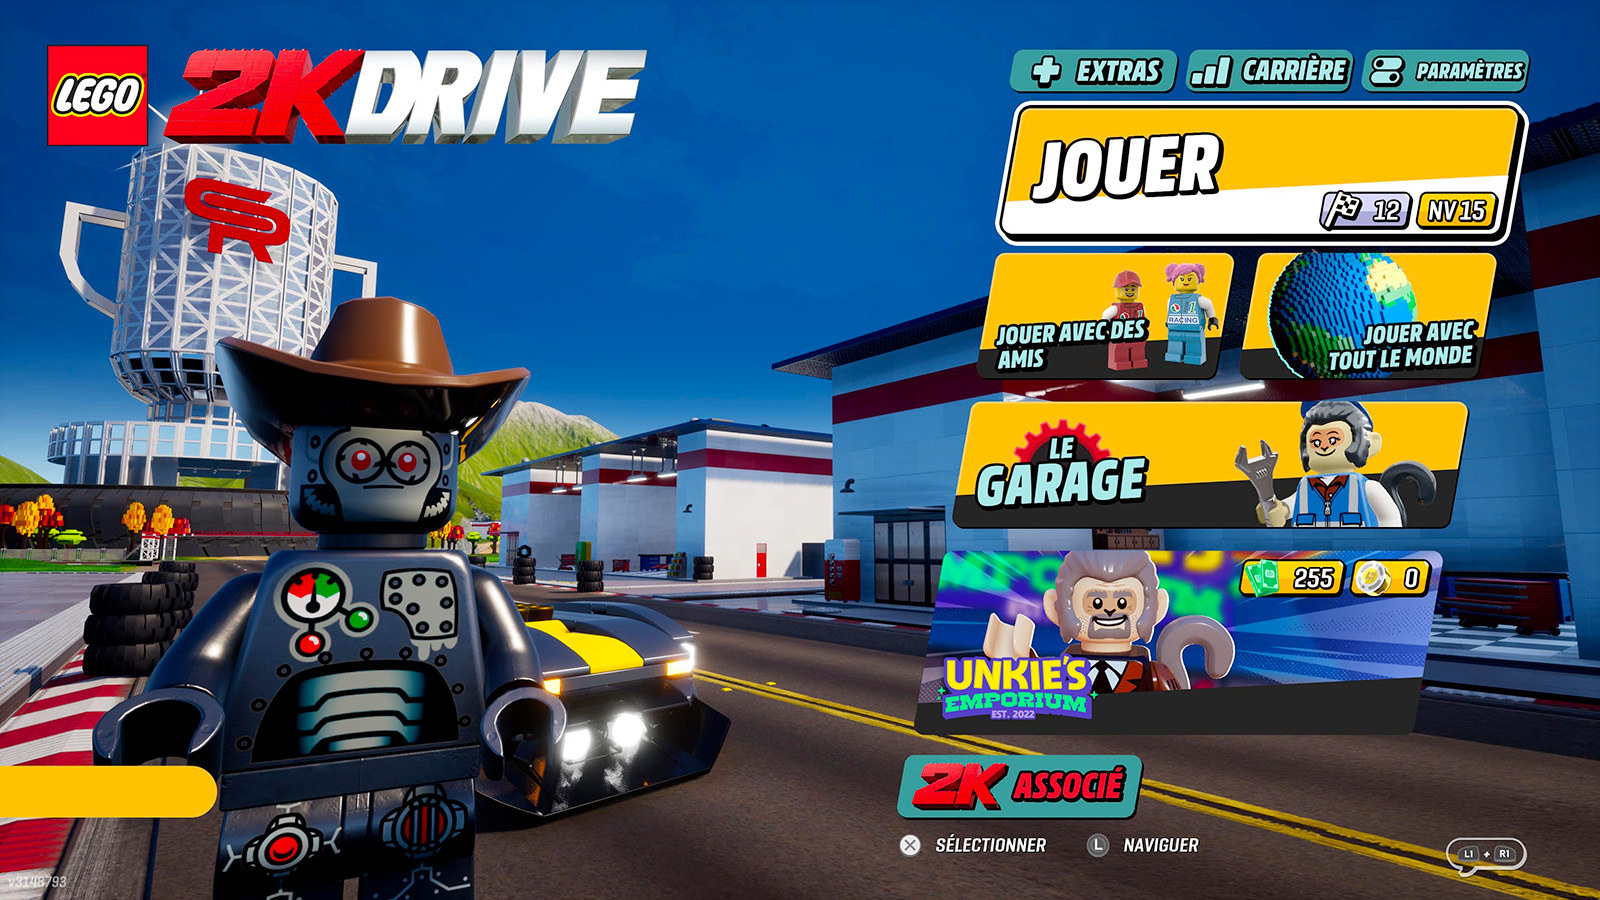 ▻ LEGO 2K Drive: not the game of the year, but it\'s still fun - HOTH BRICKS